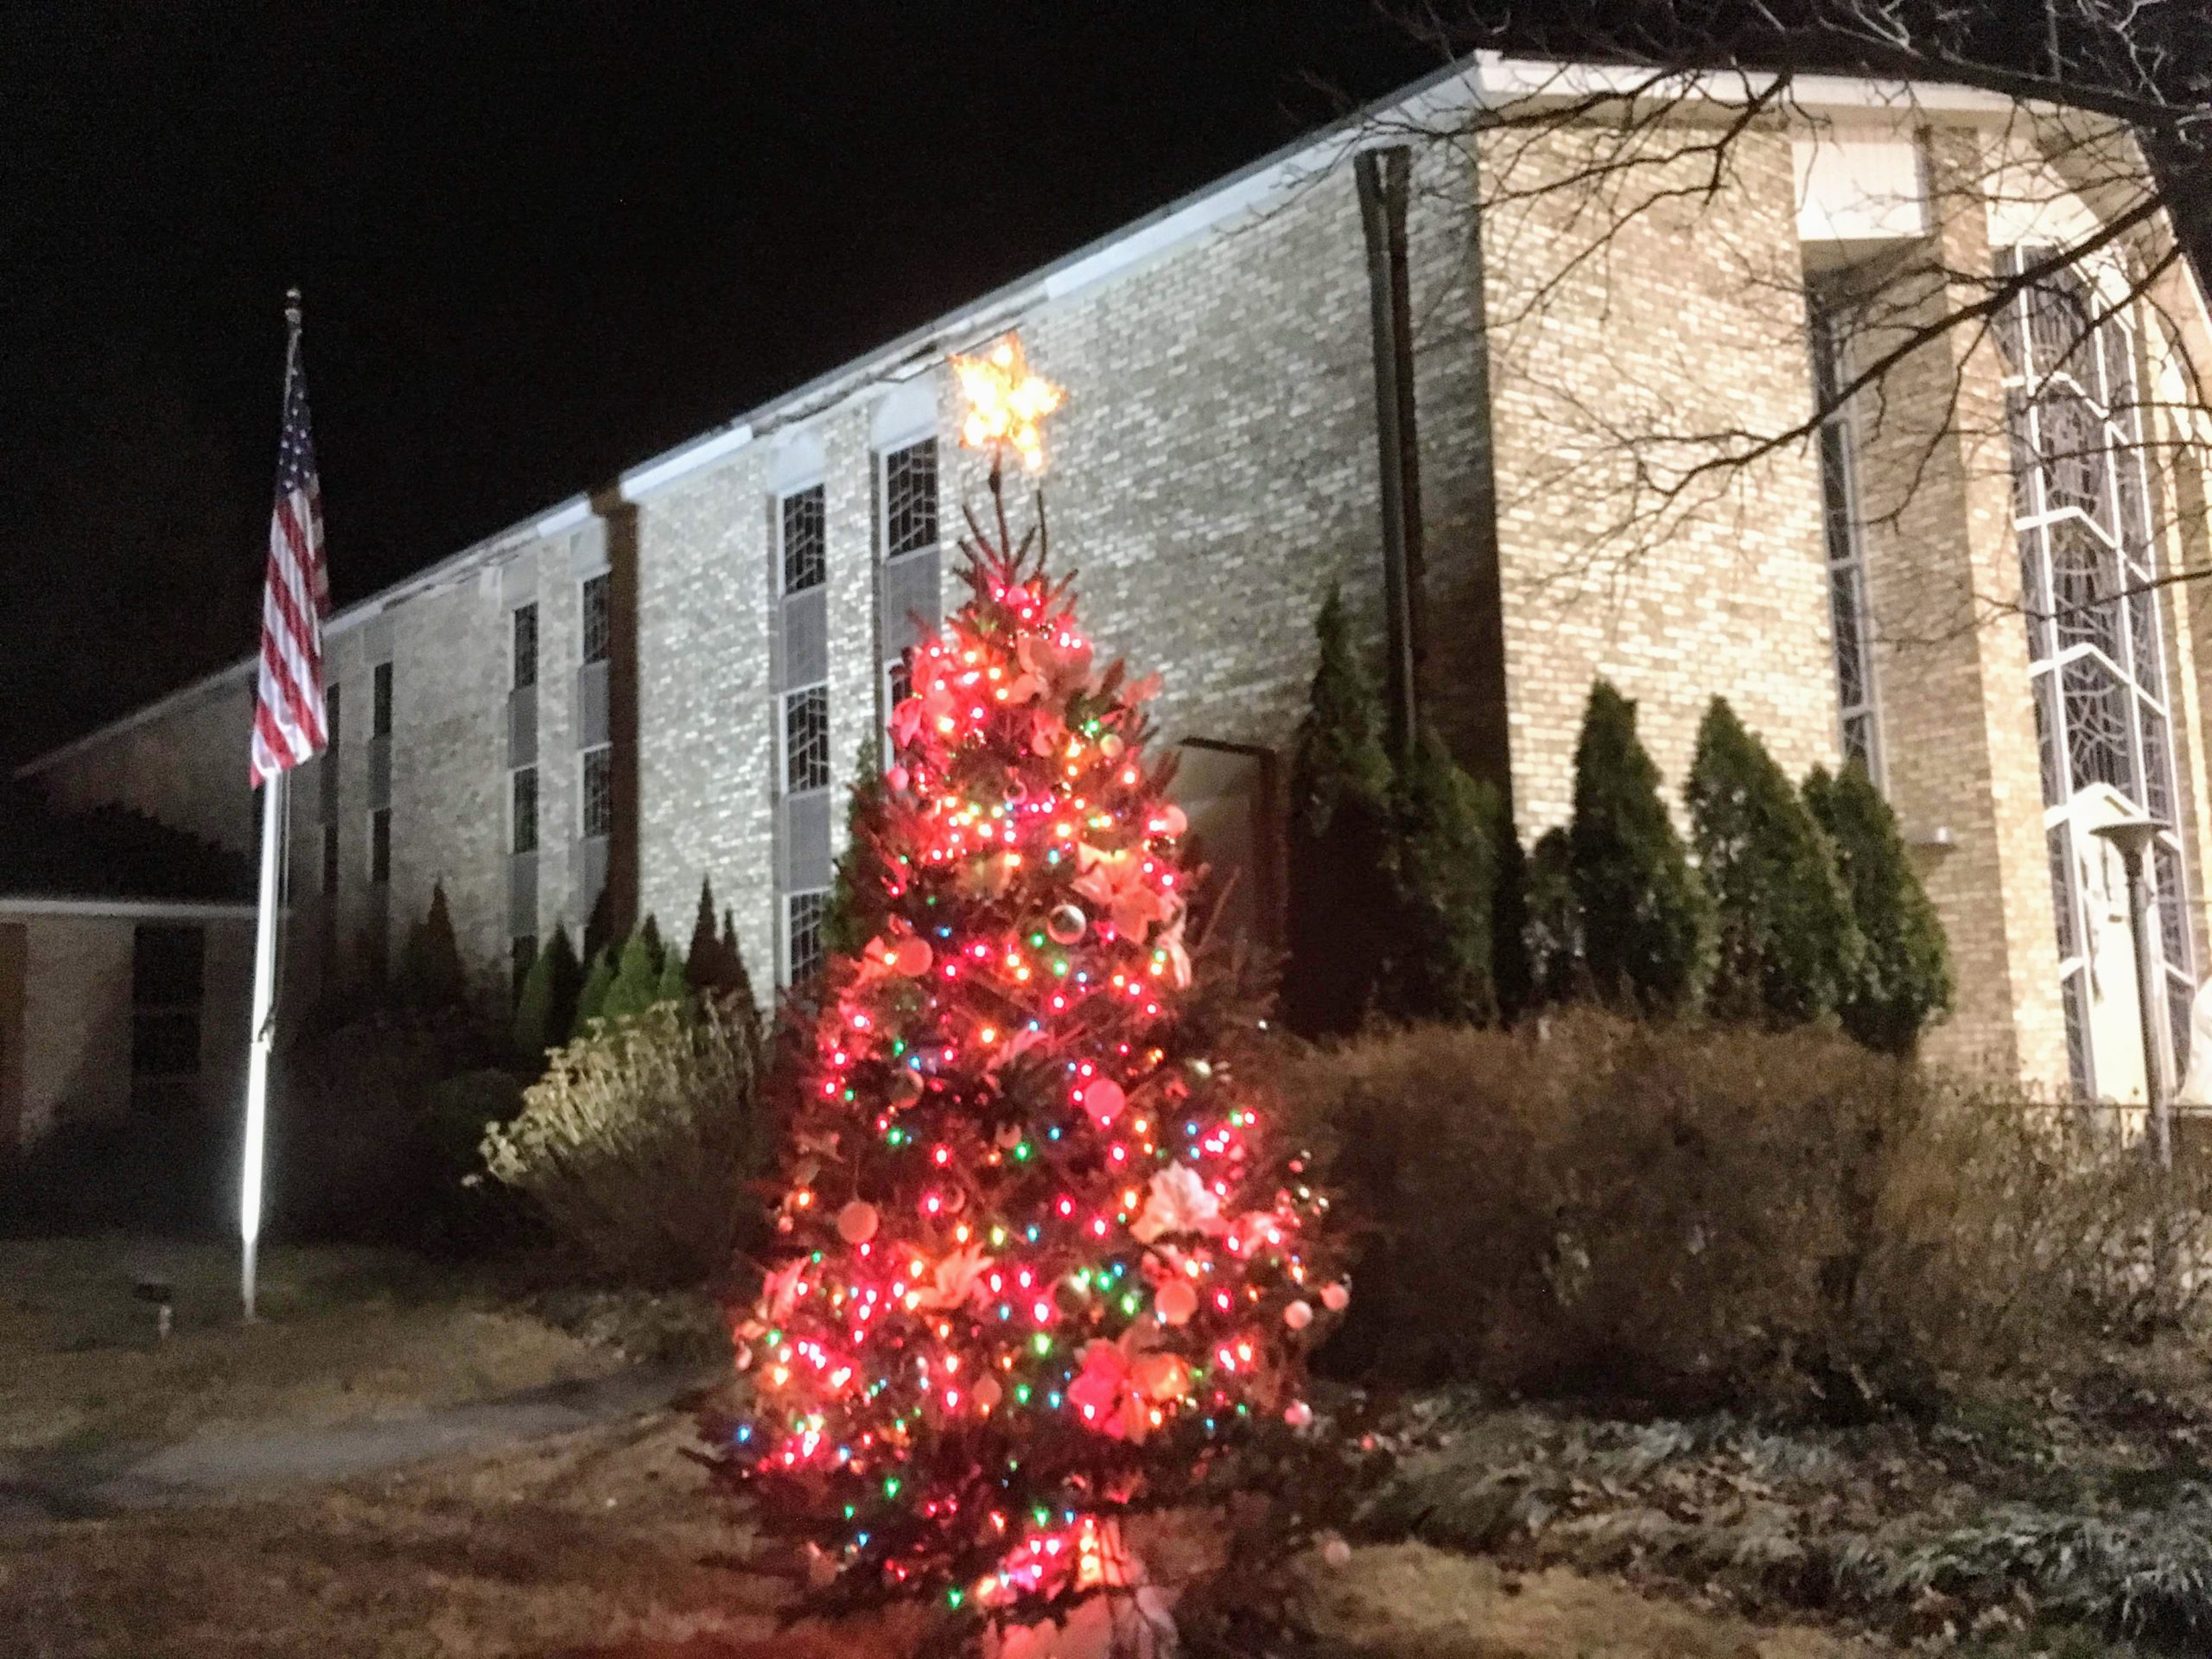 The 2018 Church of the Infant Saviour Christmas Tree is lit!